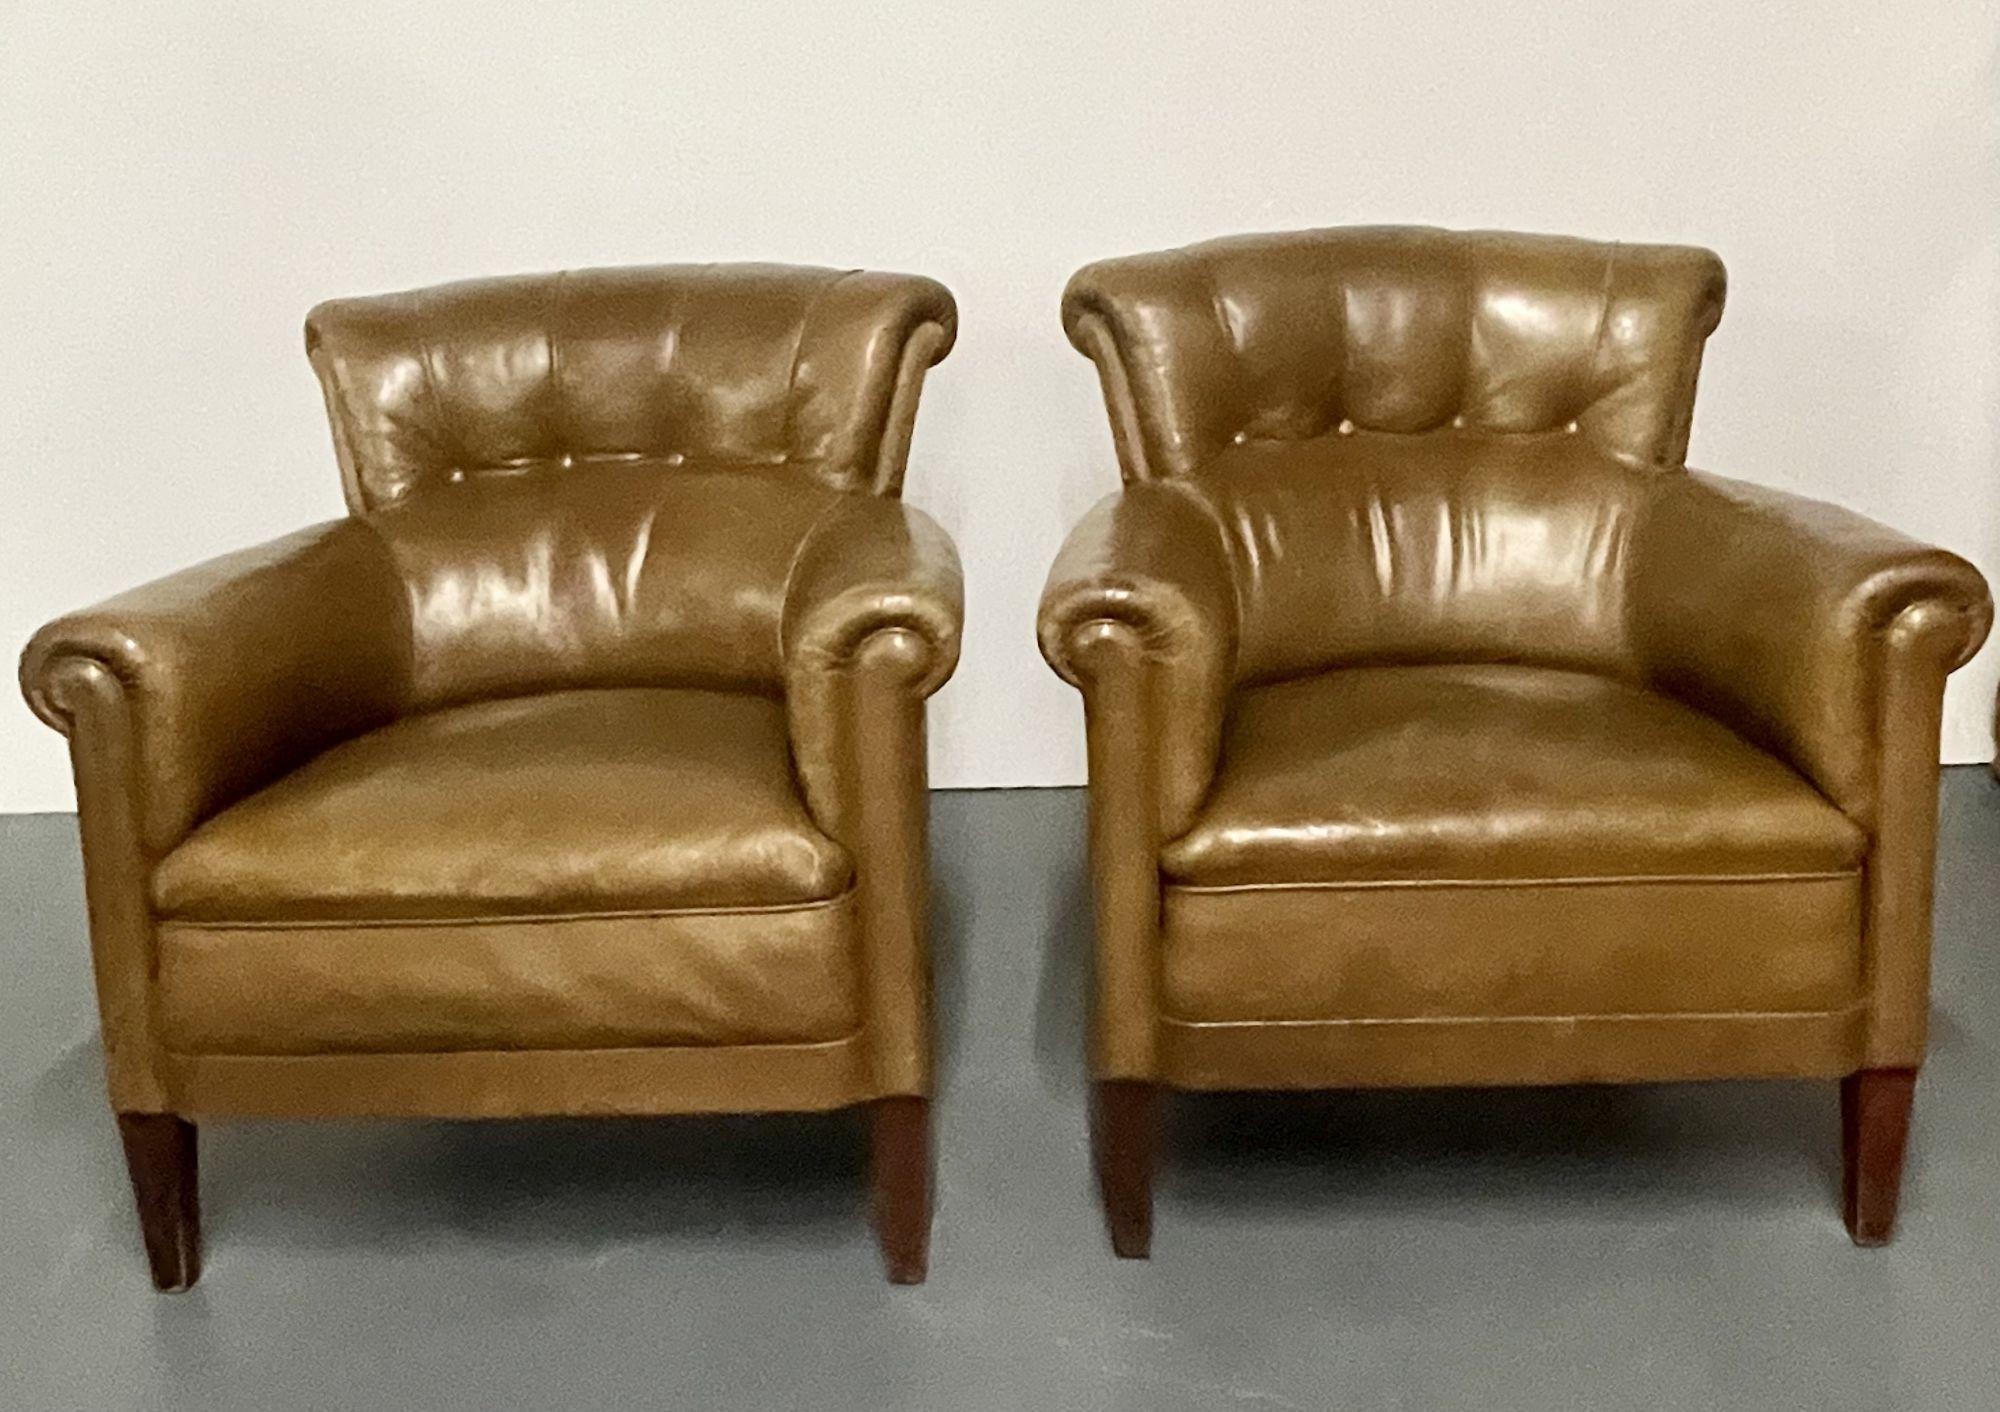 A Pair of Georgian Tuffted Leather Club, Lounge or Cigar Room Bergeres. Each in a fine worn brown leather on sprayed mahogany feet. The pair having a nice even aged worn look with button backs and oversized rolling arms. 
 
One chair with tear on